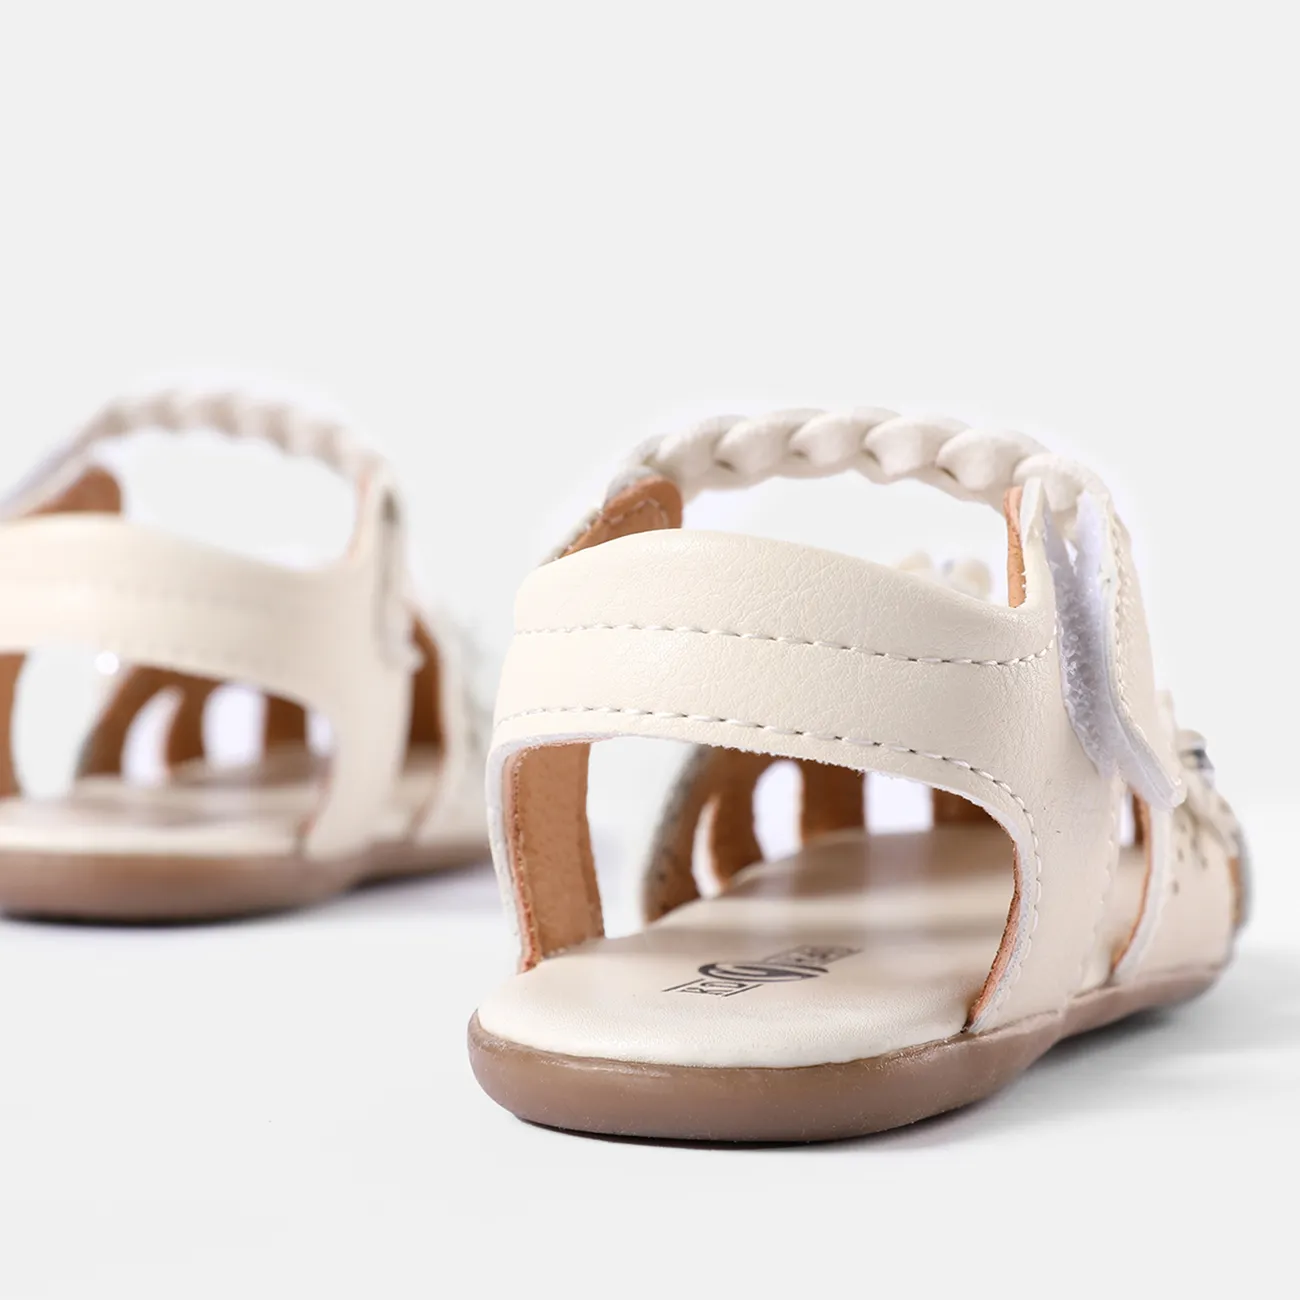 Toddler / Kid Floral Decor Braided Detail Sandals (The direction of the braid is random) (Toddler US 4.5-6.5 and Toddler US 7-9 have different soles) Beige big image 1